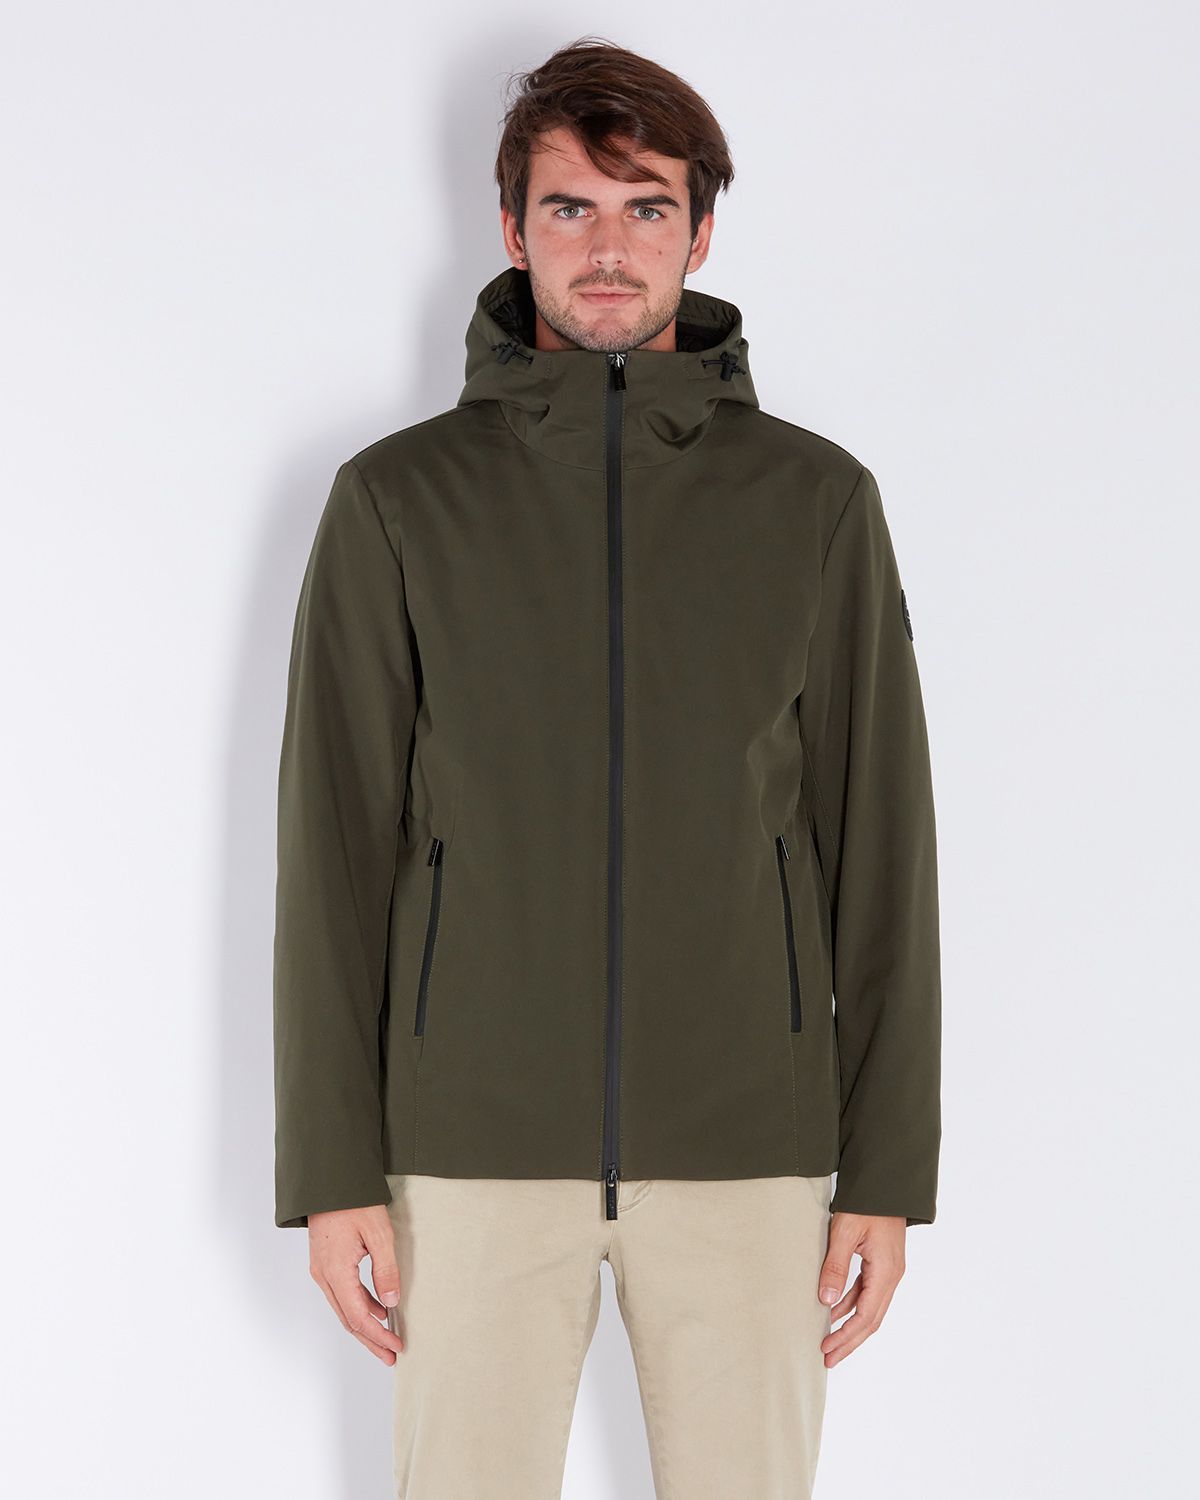 Pacific Jacket Soft Shell